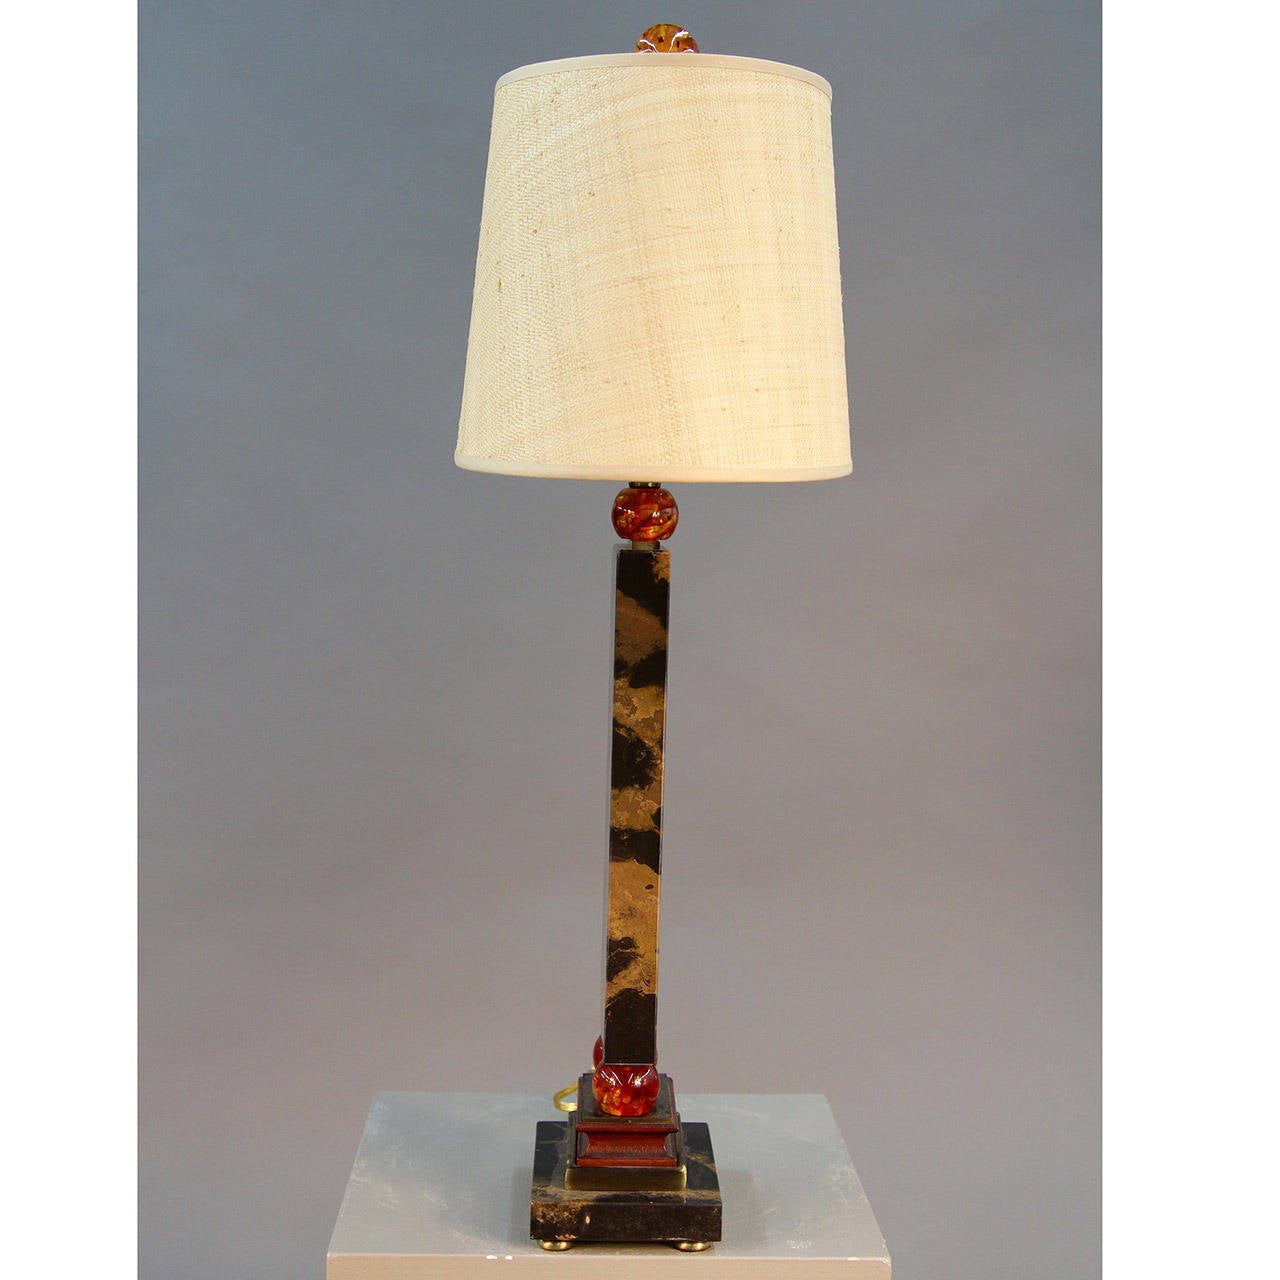 Unique Art Deco Black/Brown Marble Table Lamp with Orange Acrylic Accents In Excellent Condition For Sale In Bridport, CT